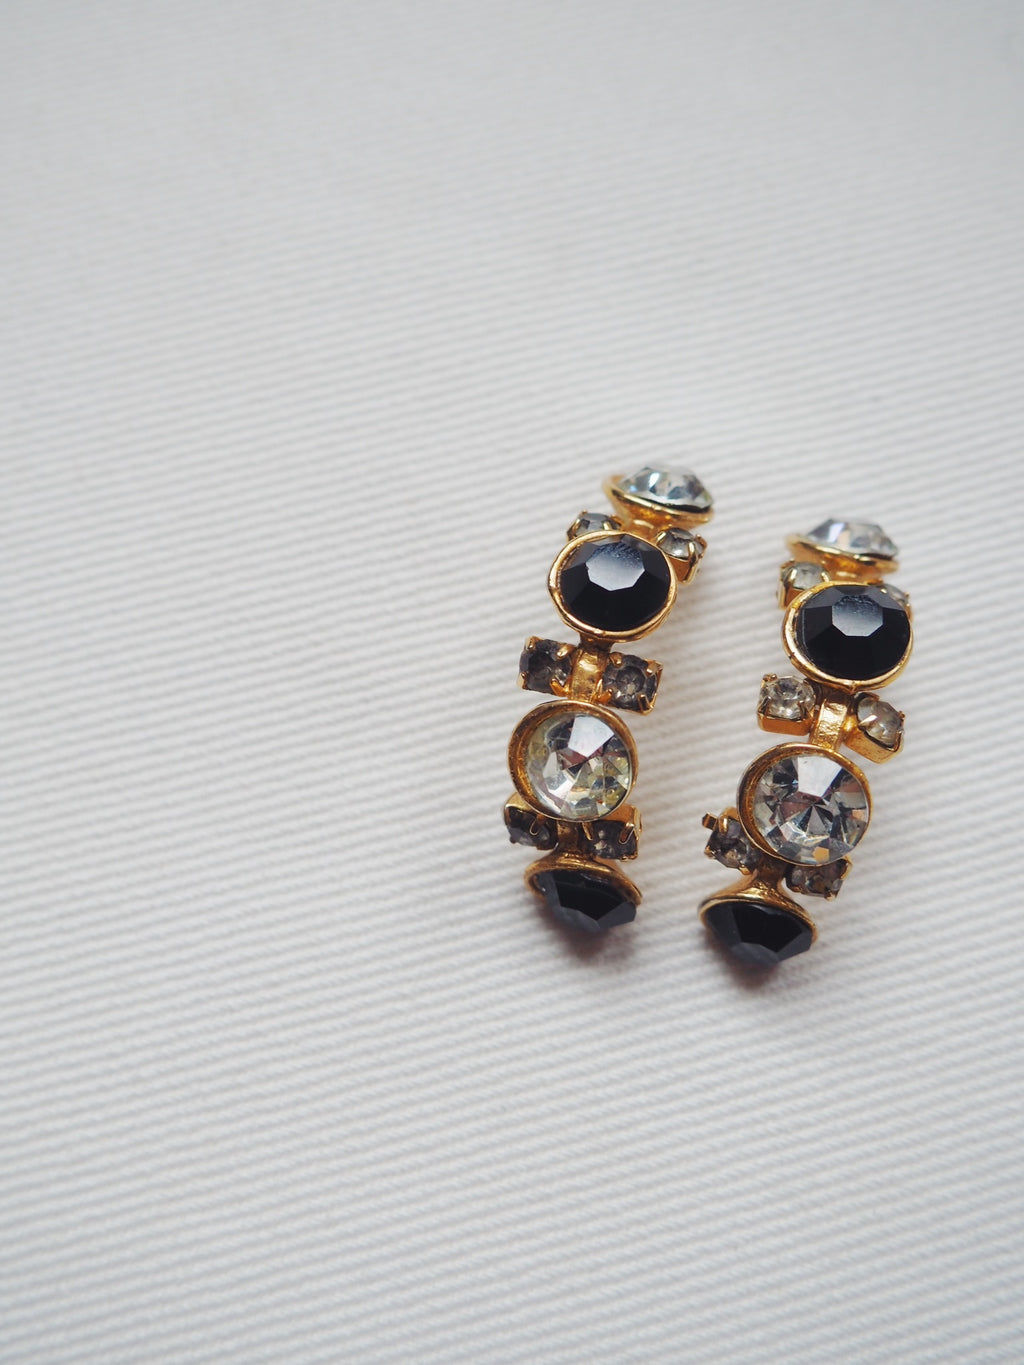 Vintage Two Toned Statement Earrings